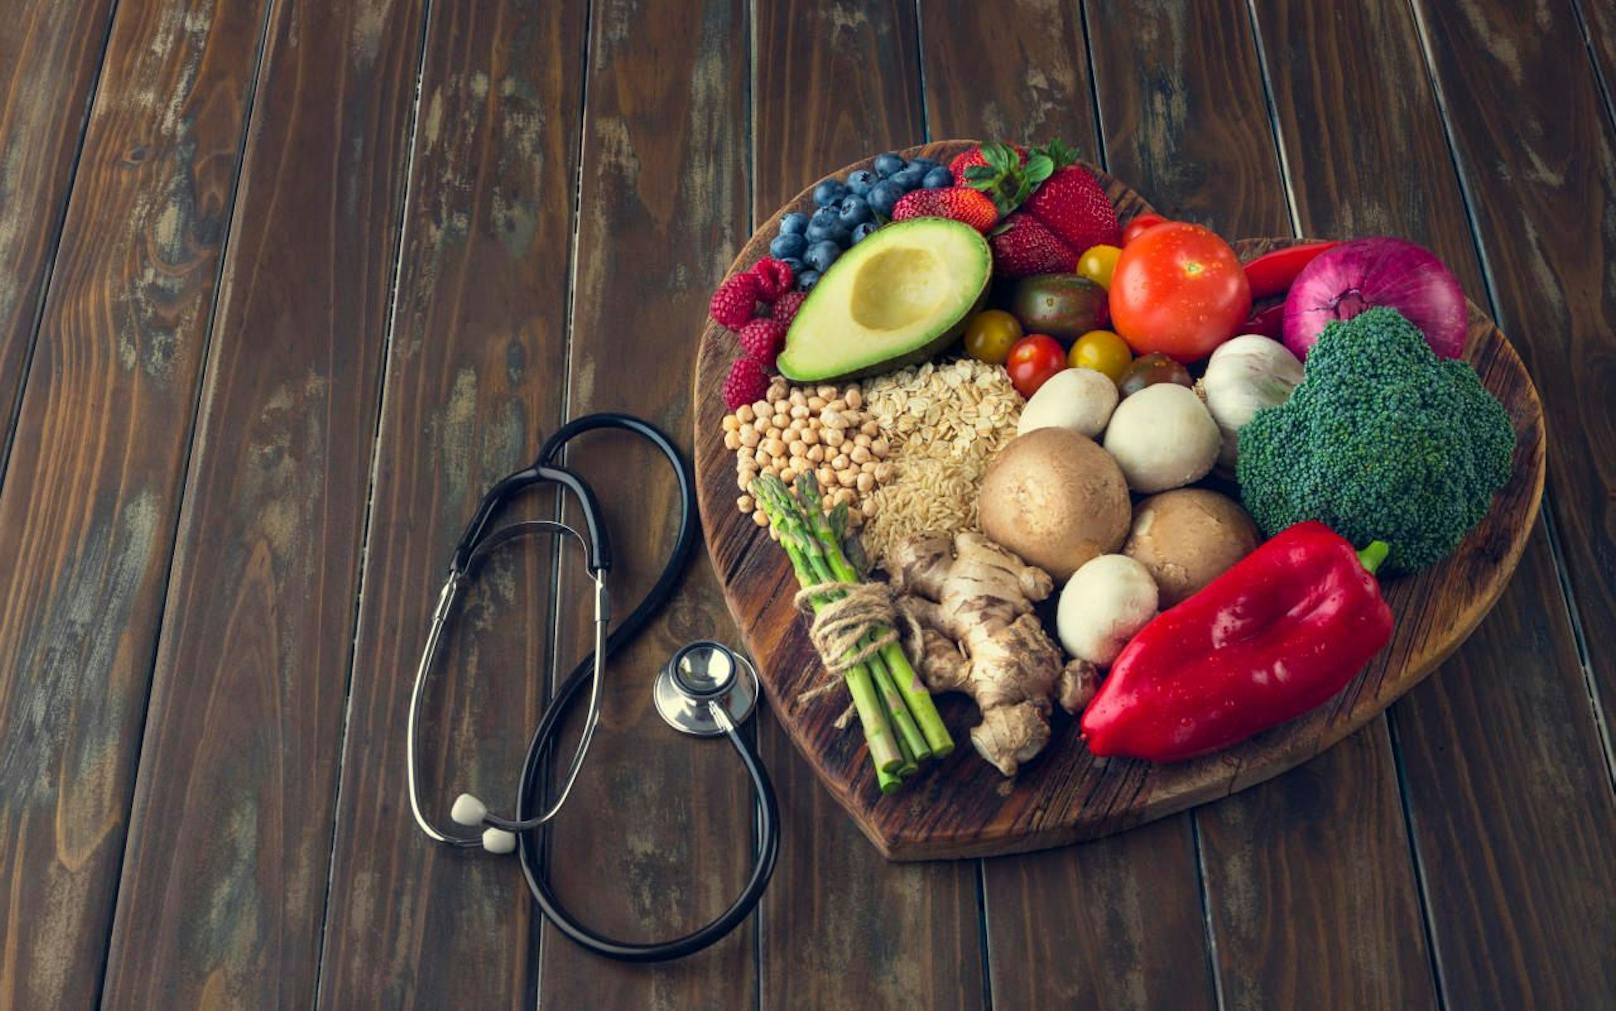 Healthy food on a heart shape cutting board. Love of food concept with fruit, vegetables, grains and high fibre foods. Rustic wood textures. There is also a stethoscope 